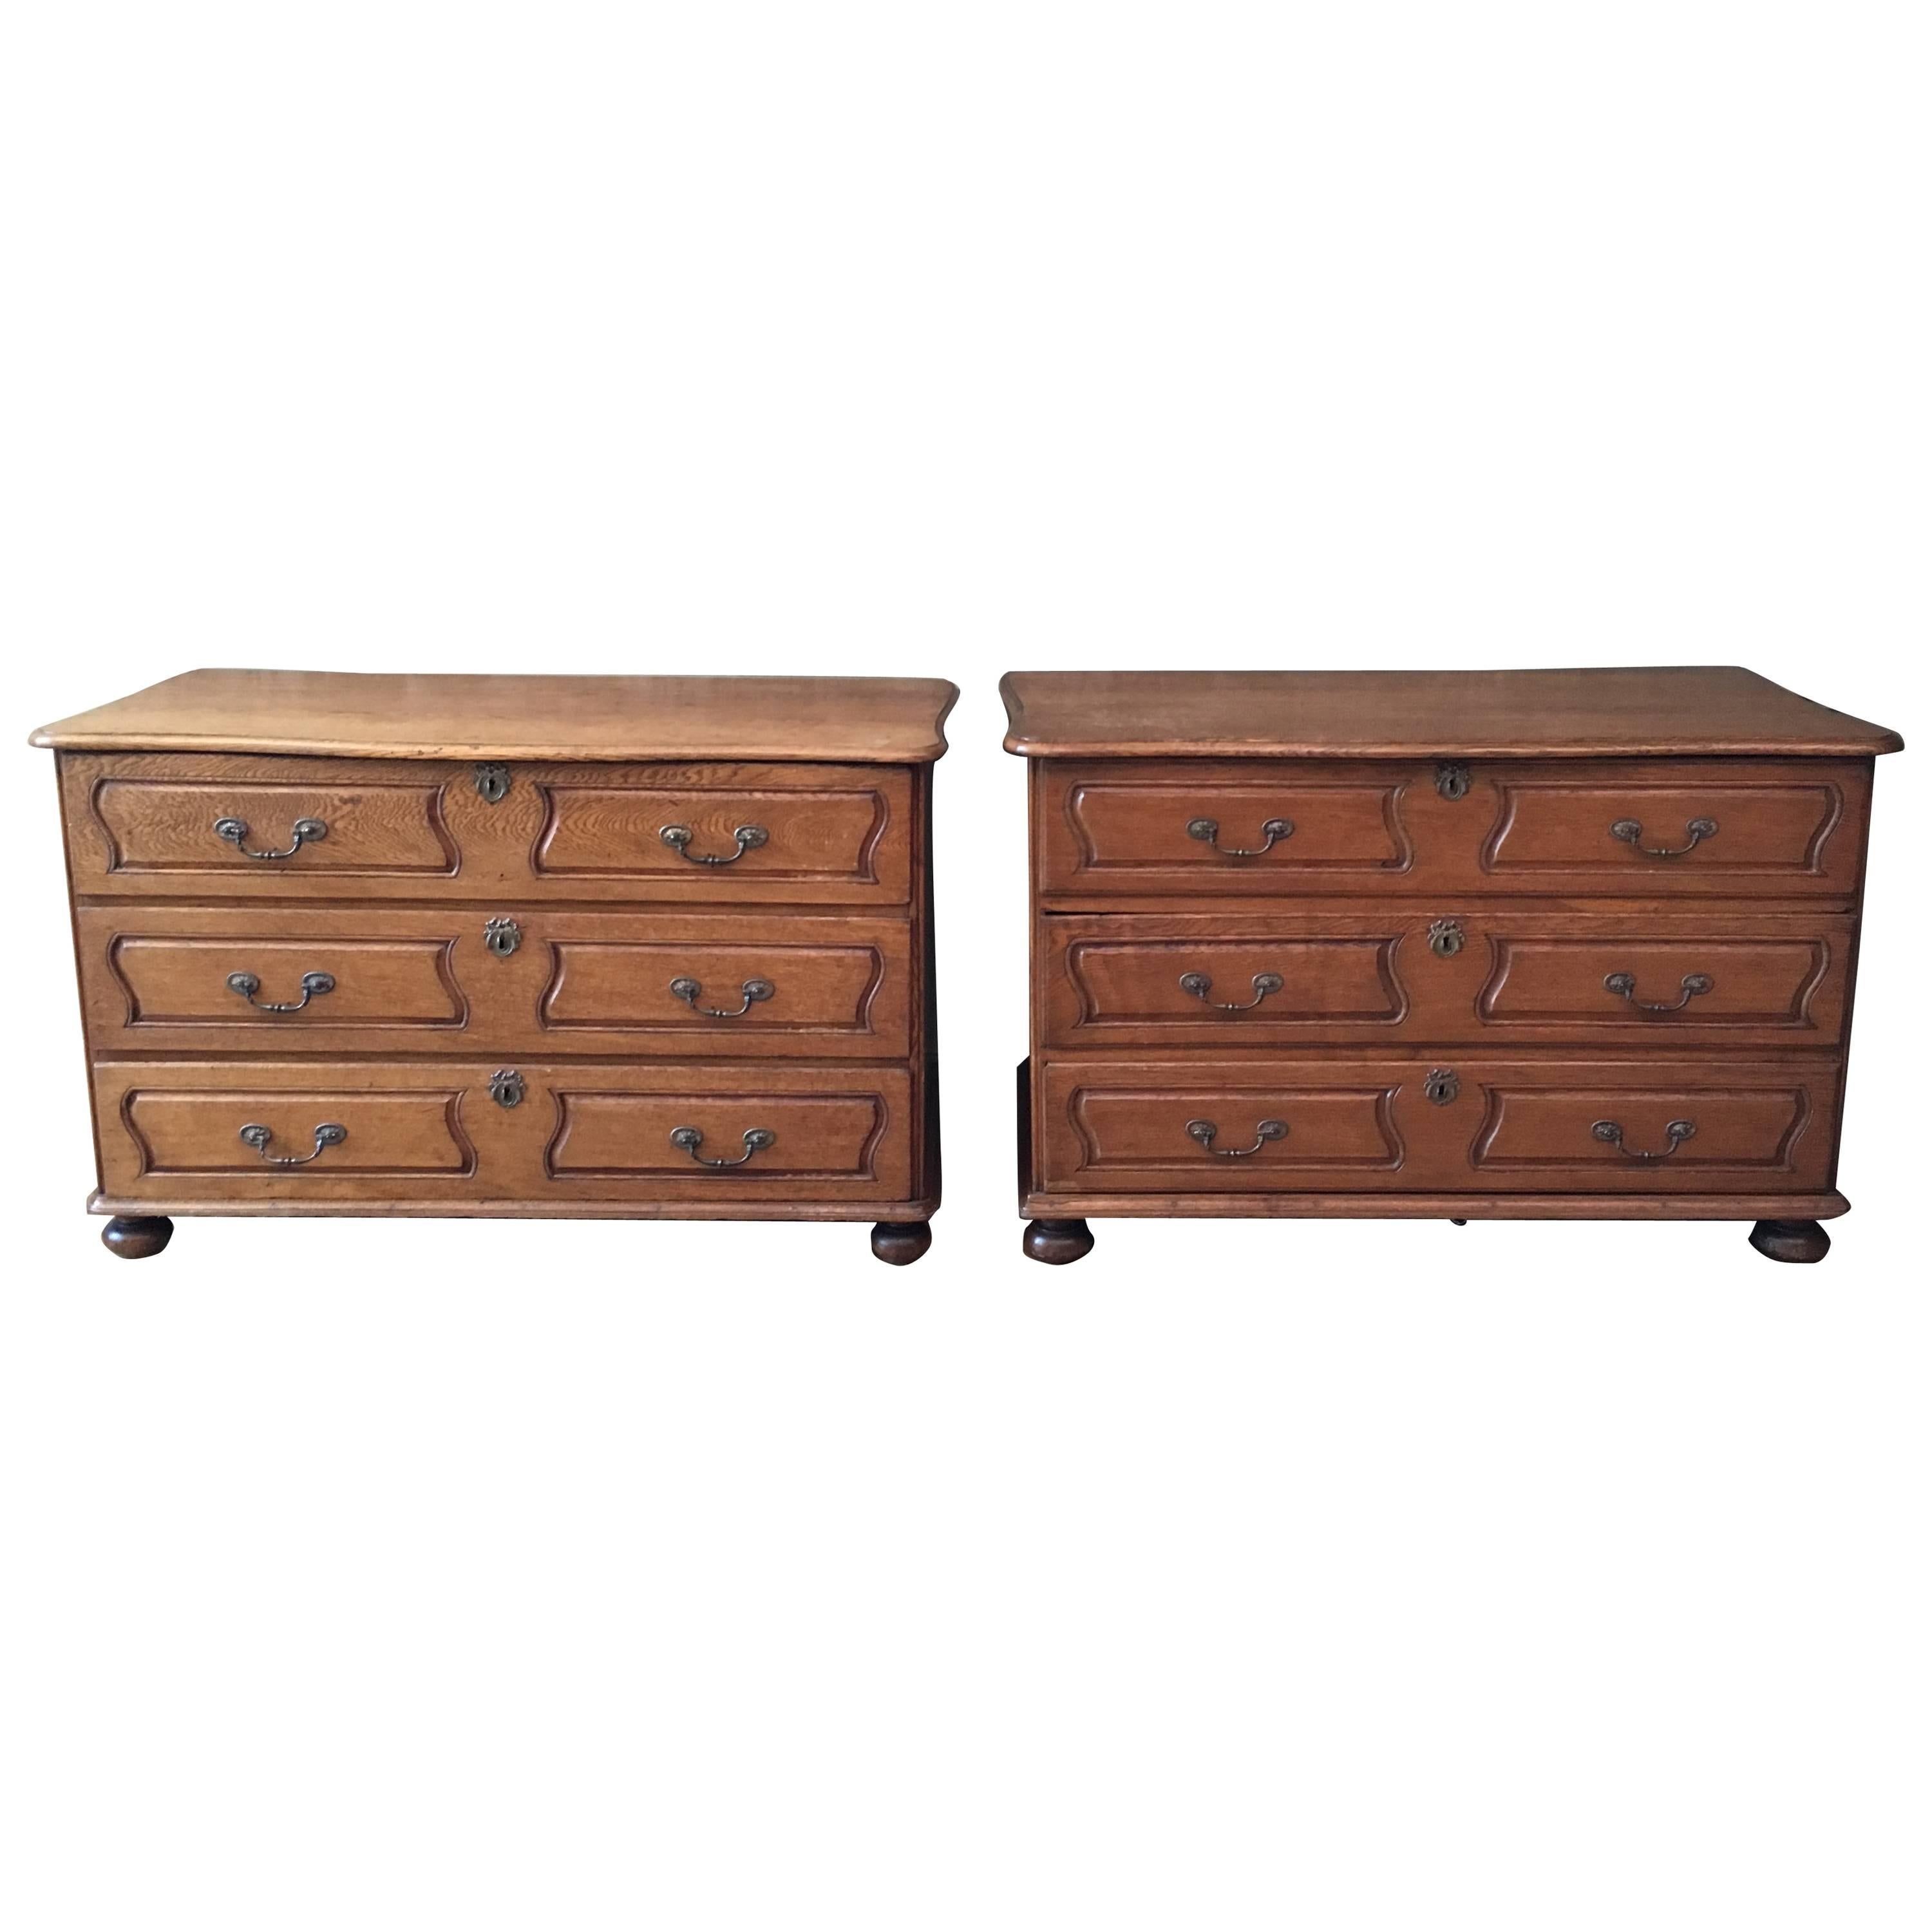 Pair of Early 18th Century Commodes For Sale